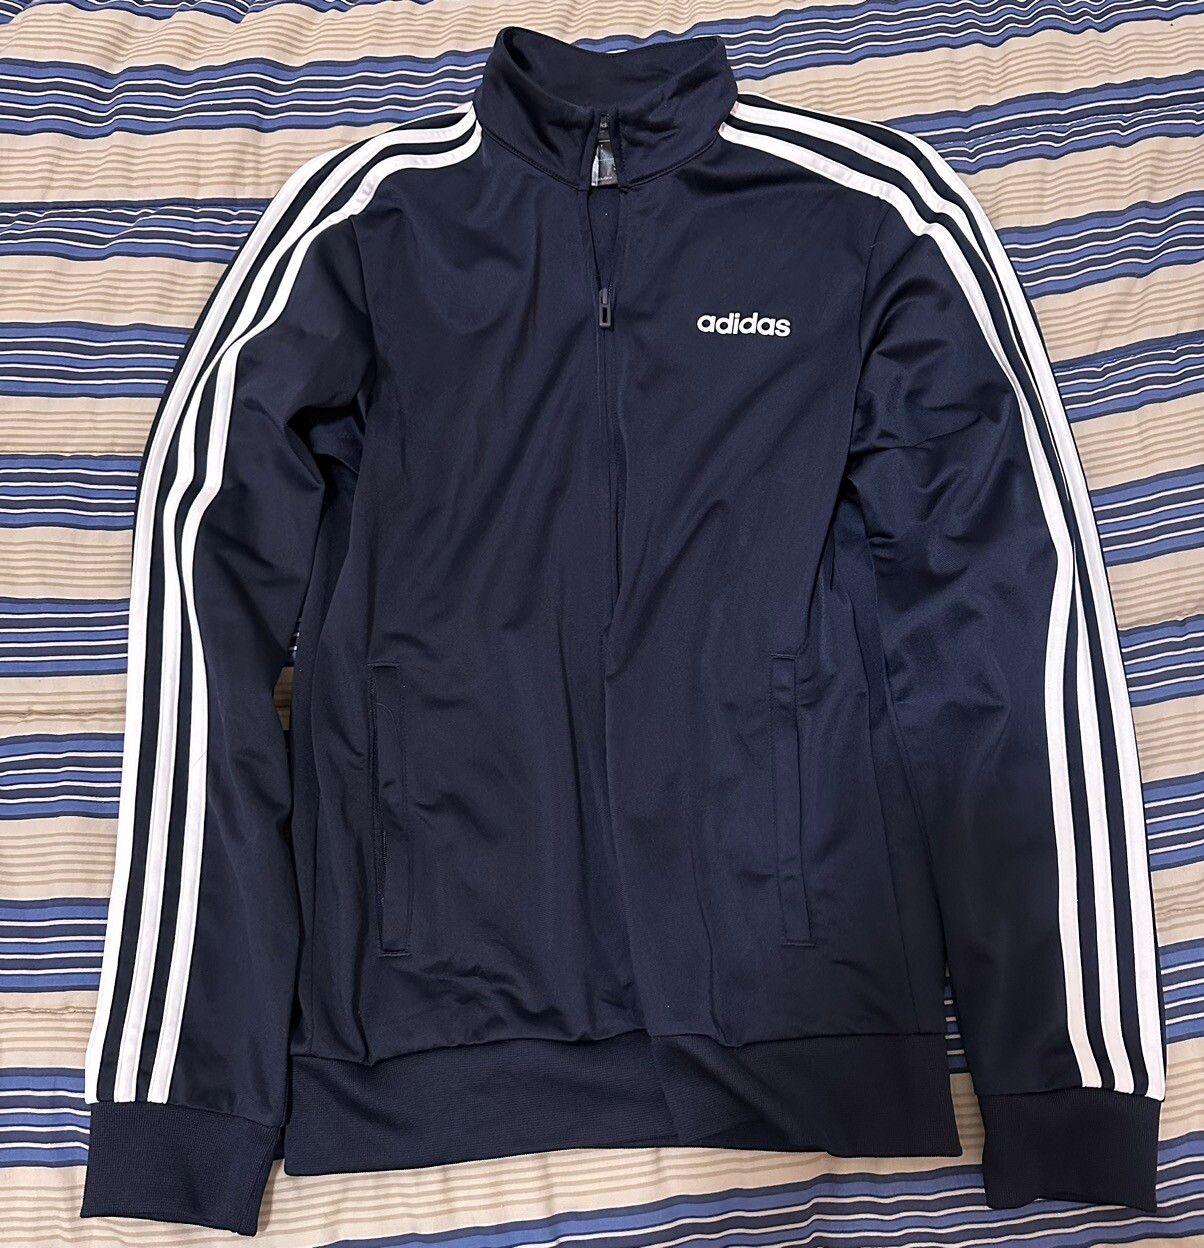 Adidas adidas navy track jacket Size US S / EU 44-46 / 1 - 1 Preview